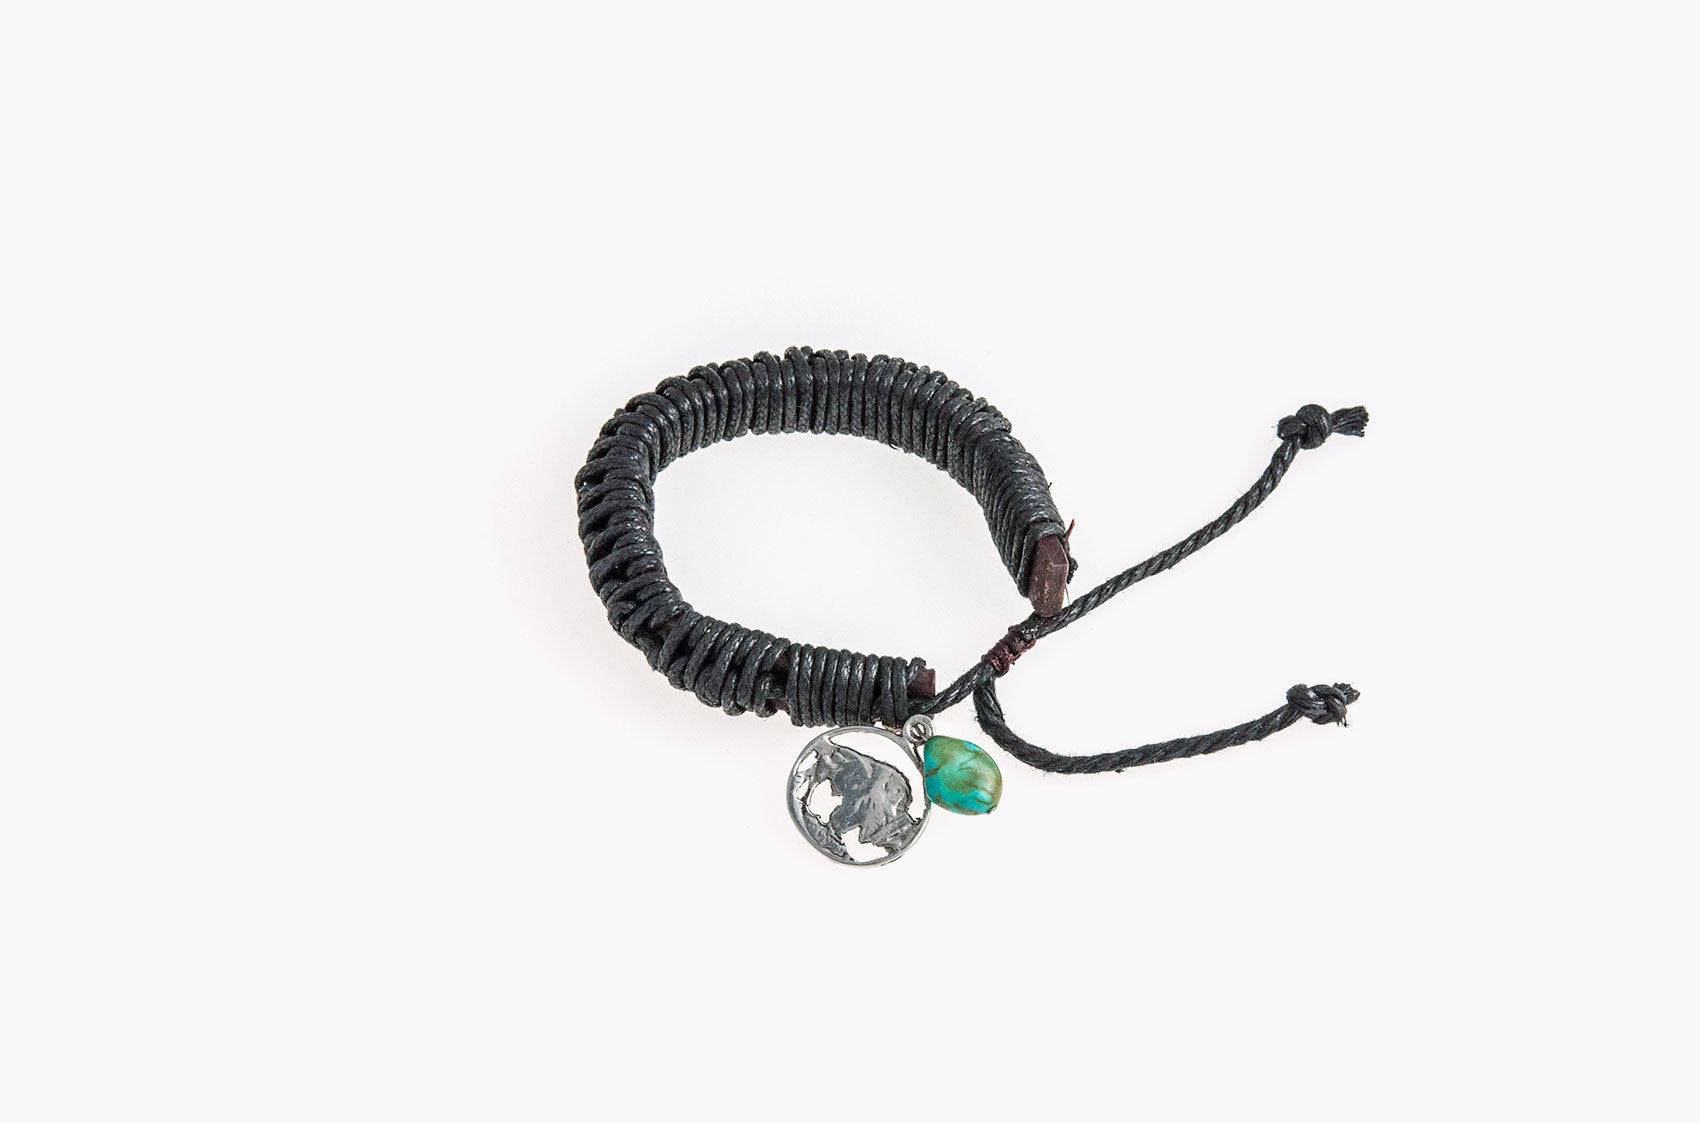 Black leather and cord bracelet with turquoise